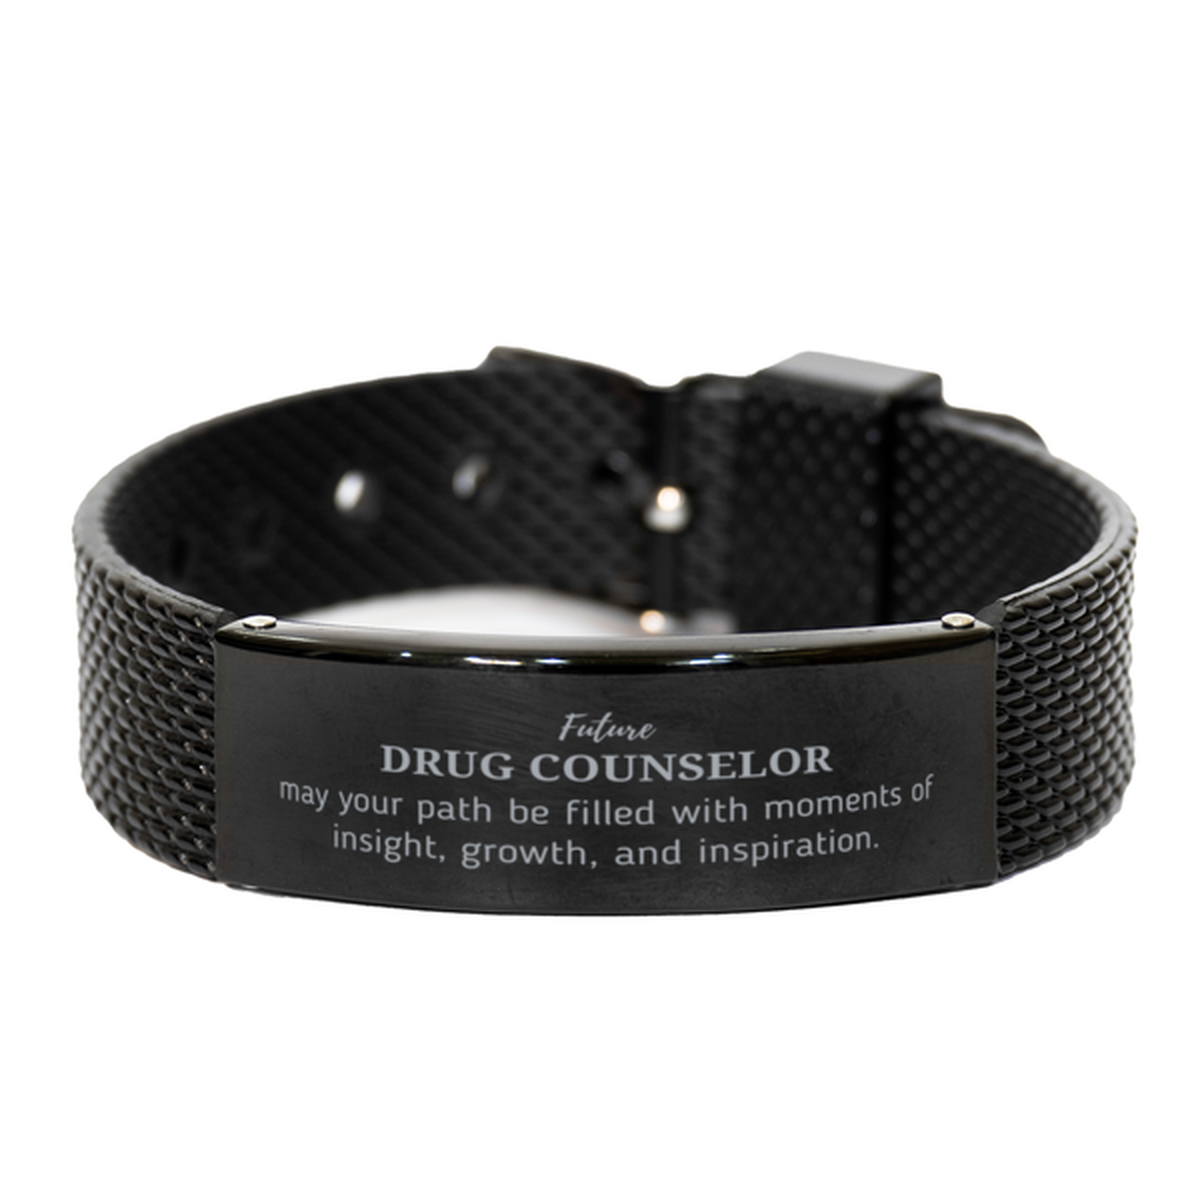 Future Drug Counselor Gifts, May your path be filled with moments of insight, Graduation Gifts for New Drug Counselor, Christmas Unique Black Shark Mesh Bracelet For Men, Women, Friends